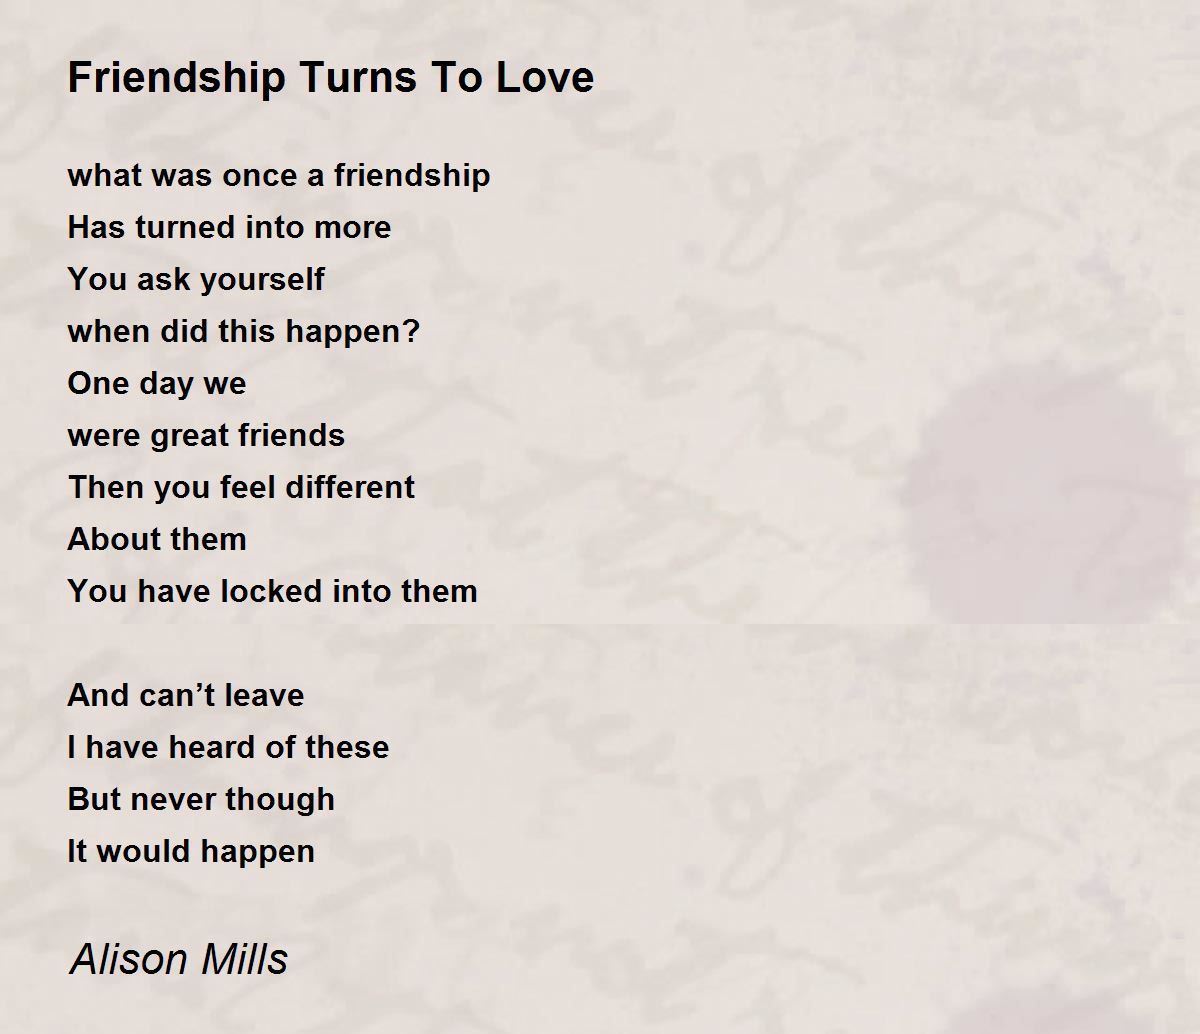 Love poems and friendship 3 Poems